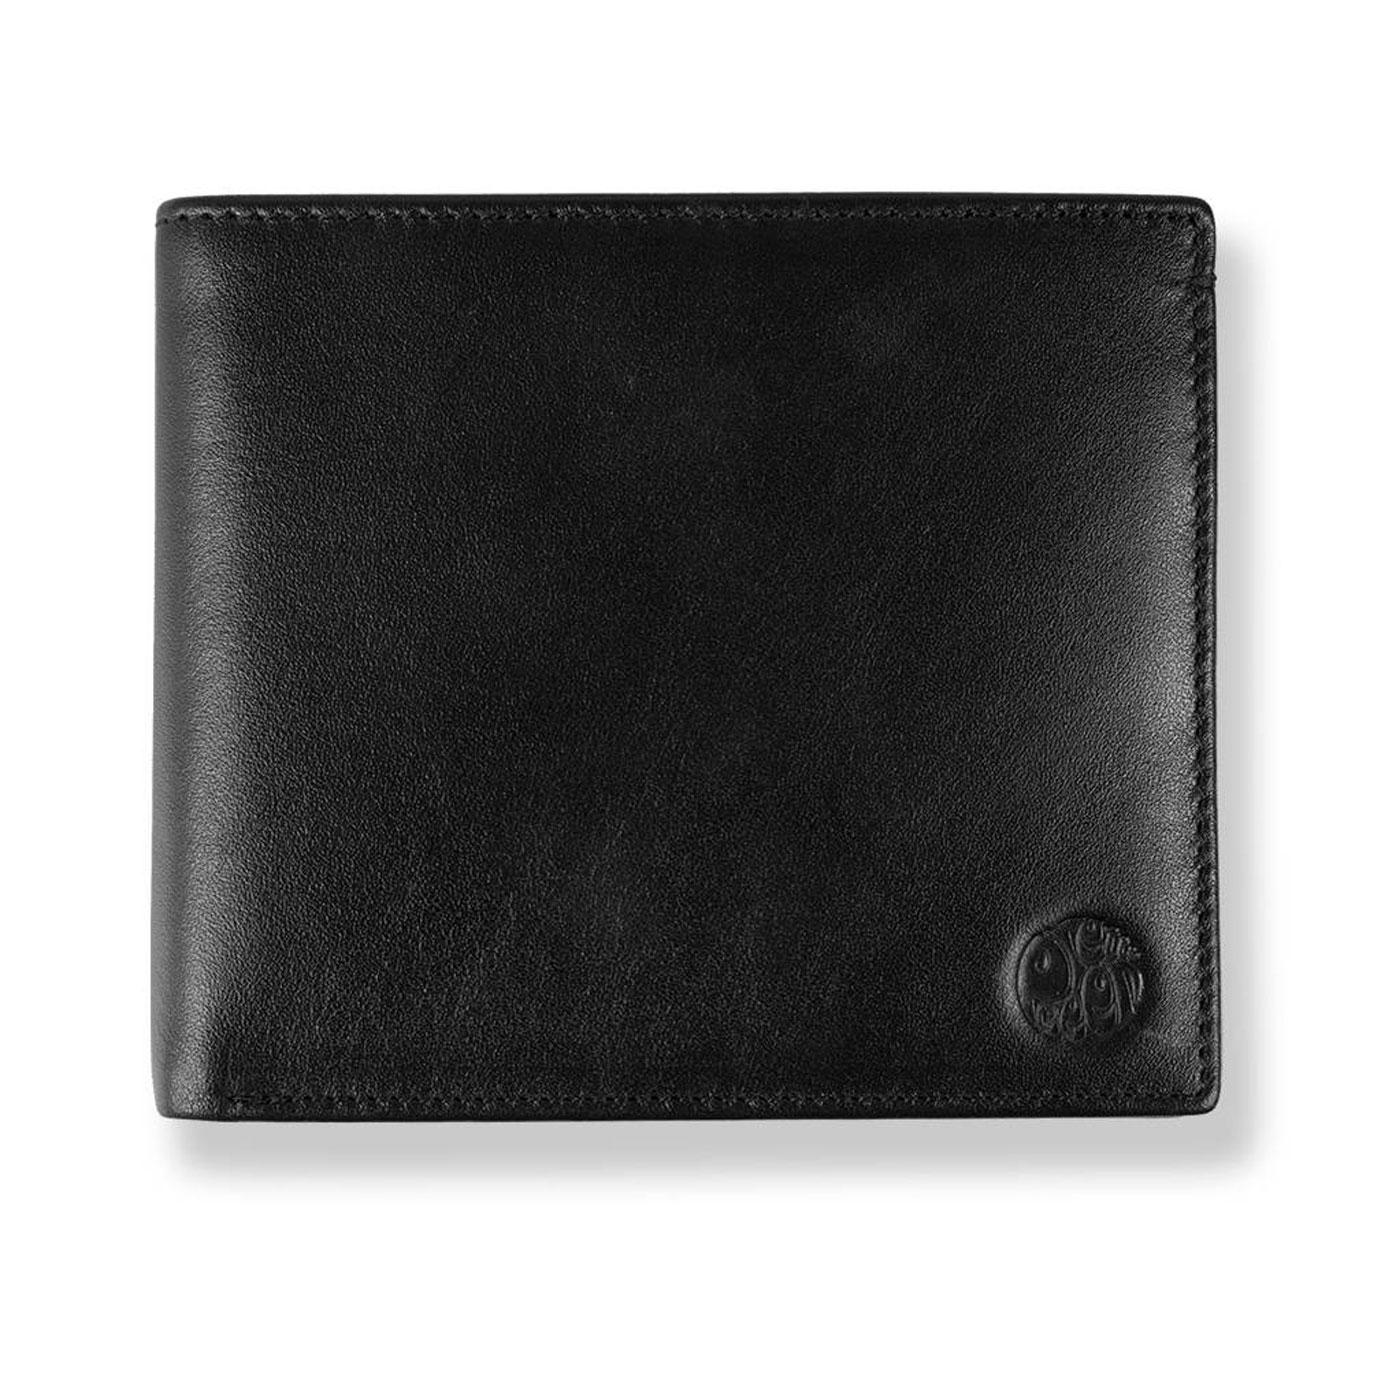 Pretty Green Men's Union Jack Bifold Wallet in Black with Gift Box 